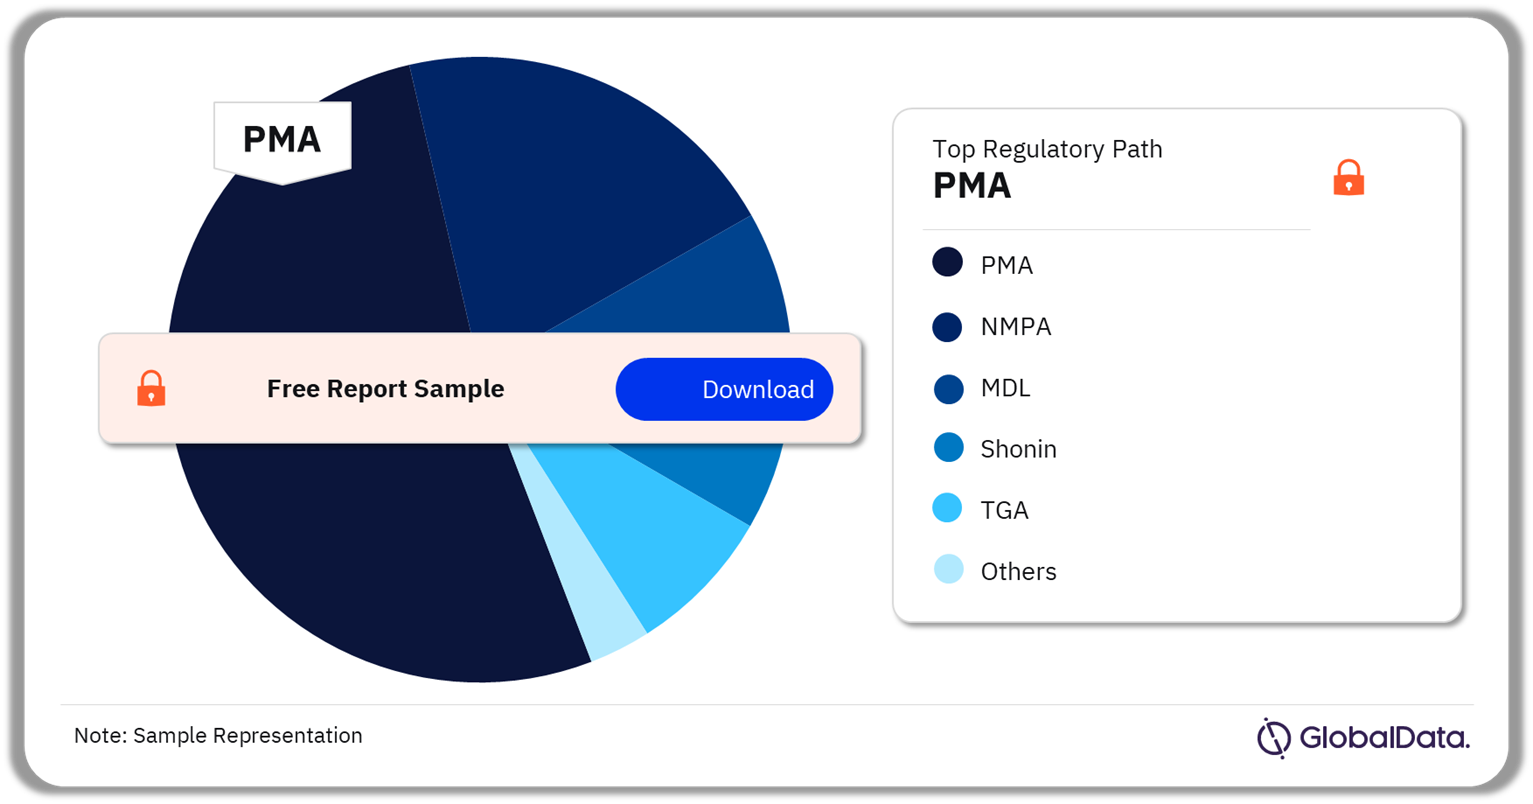 Left Atrial Appendage Closure Devices Pipeline Market Analysis by Regulatory Paths, 2024 (%)